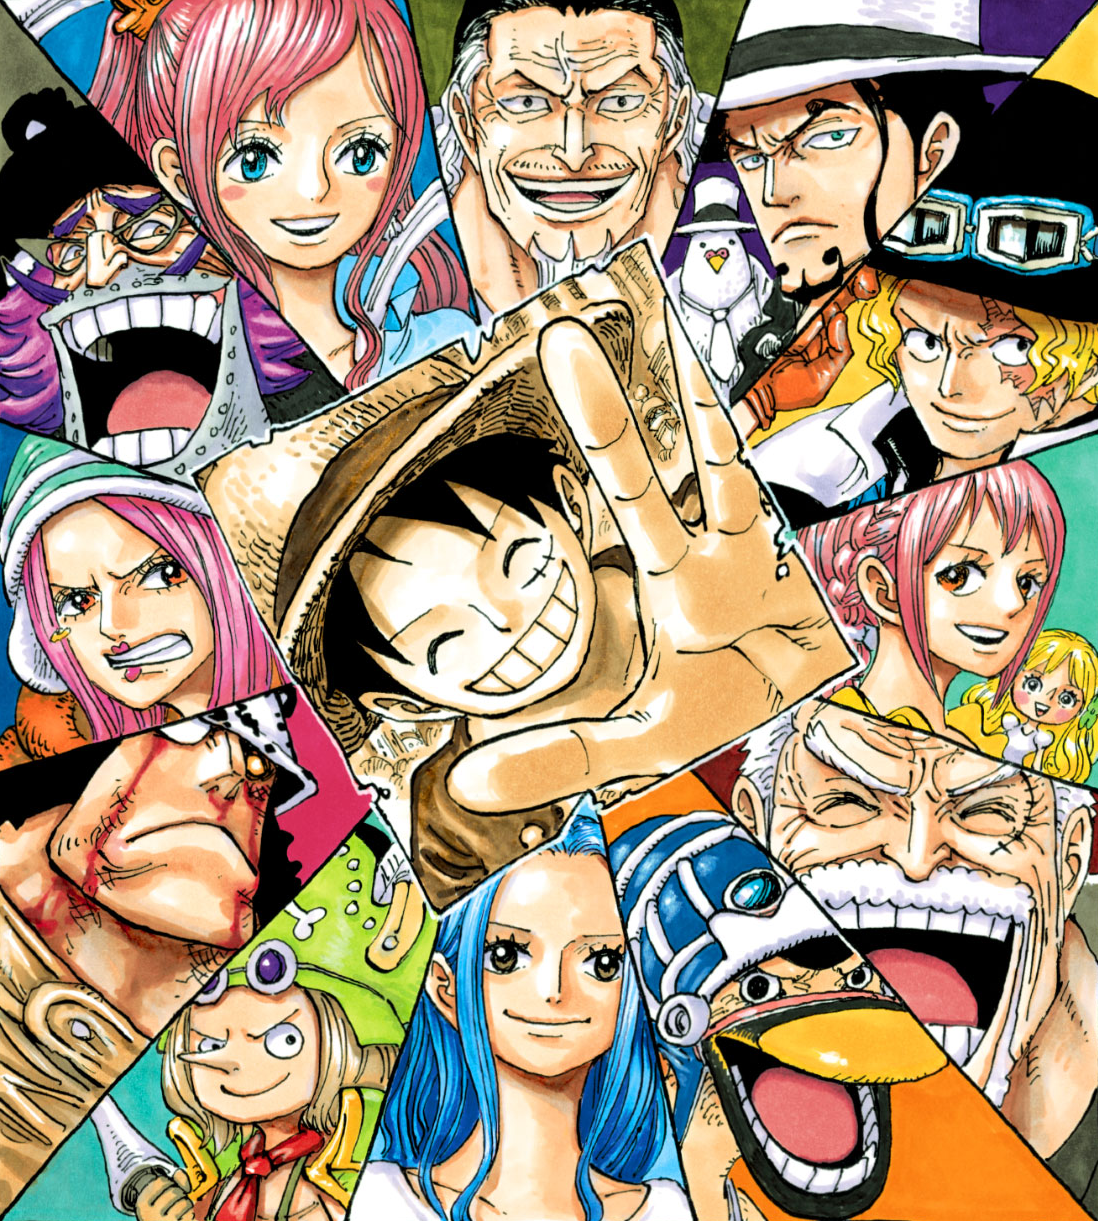 All 'One Piece' Arcs in Order